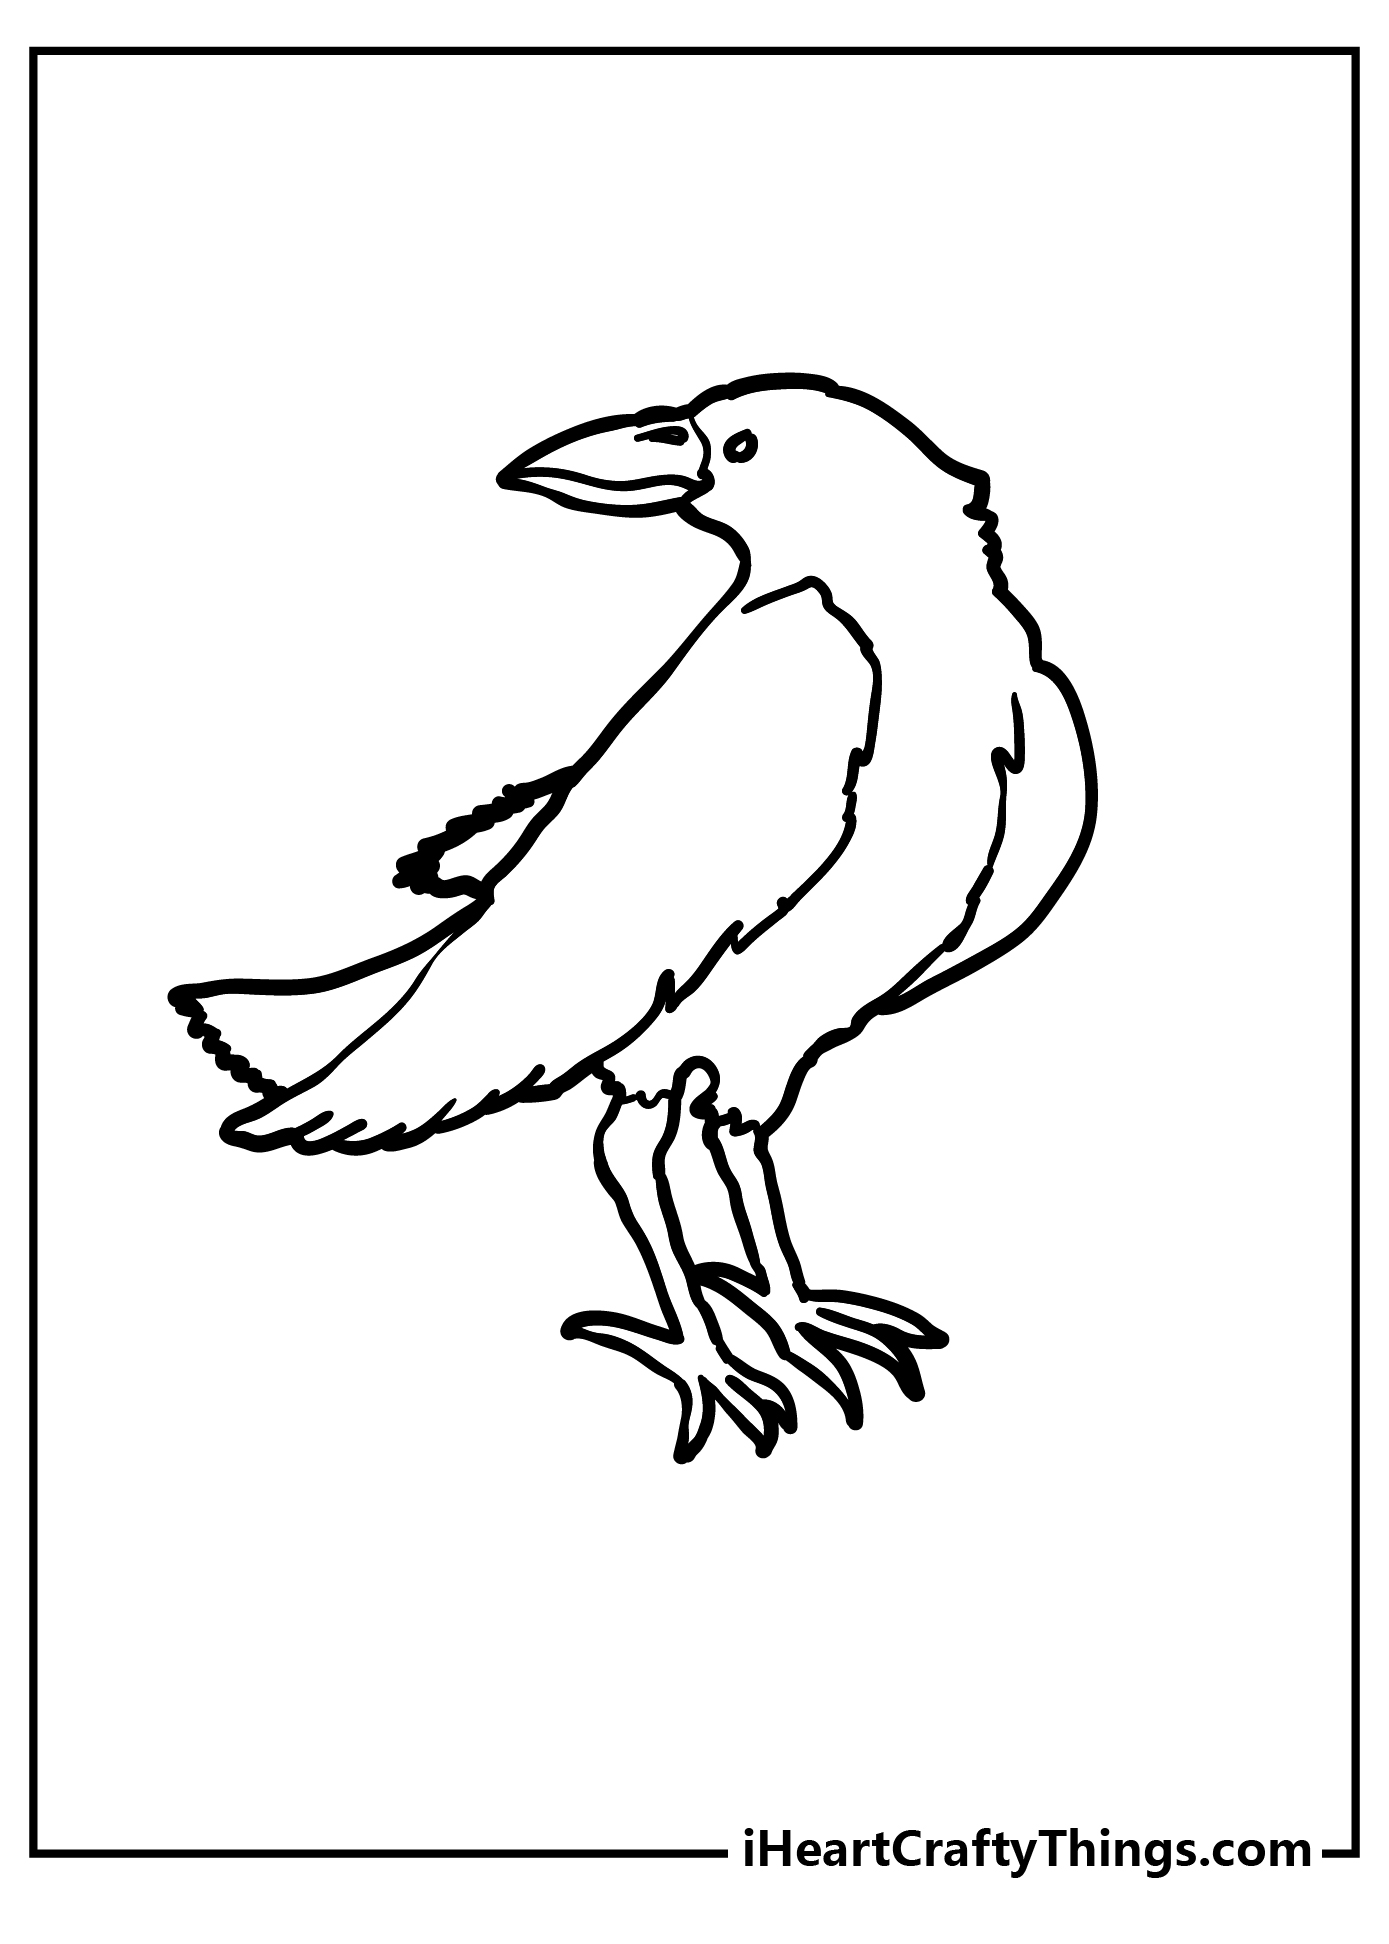 Raven Coloring Pages free pdf download